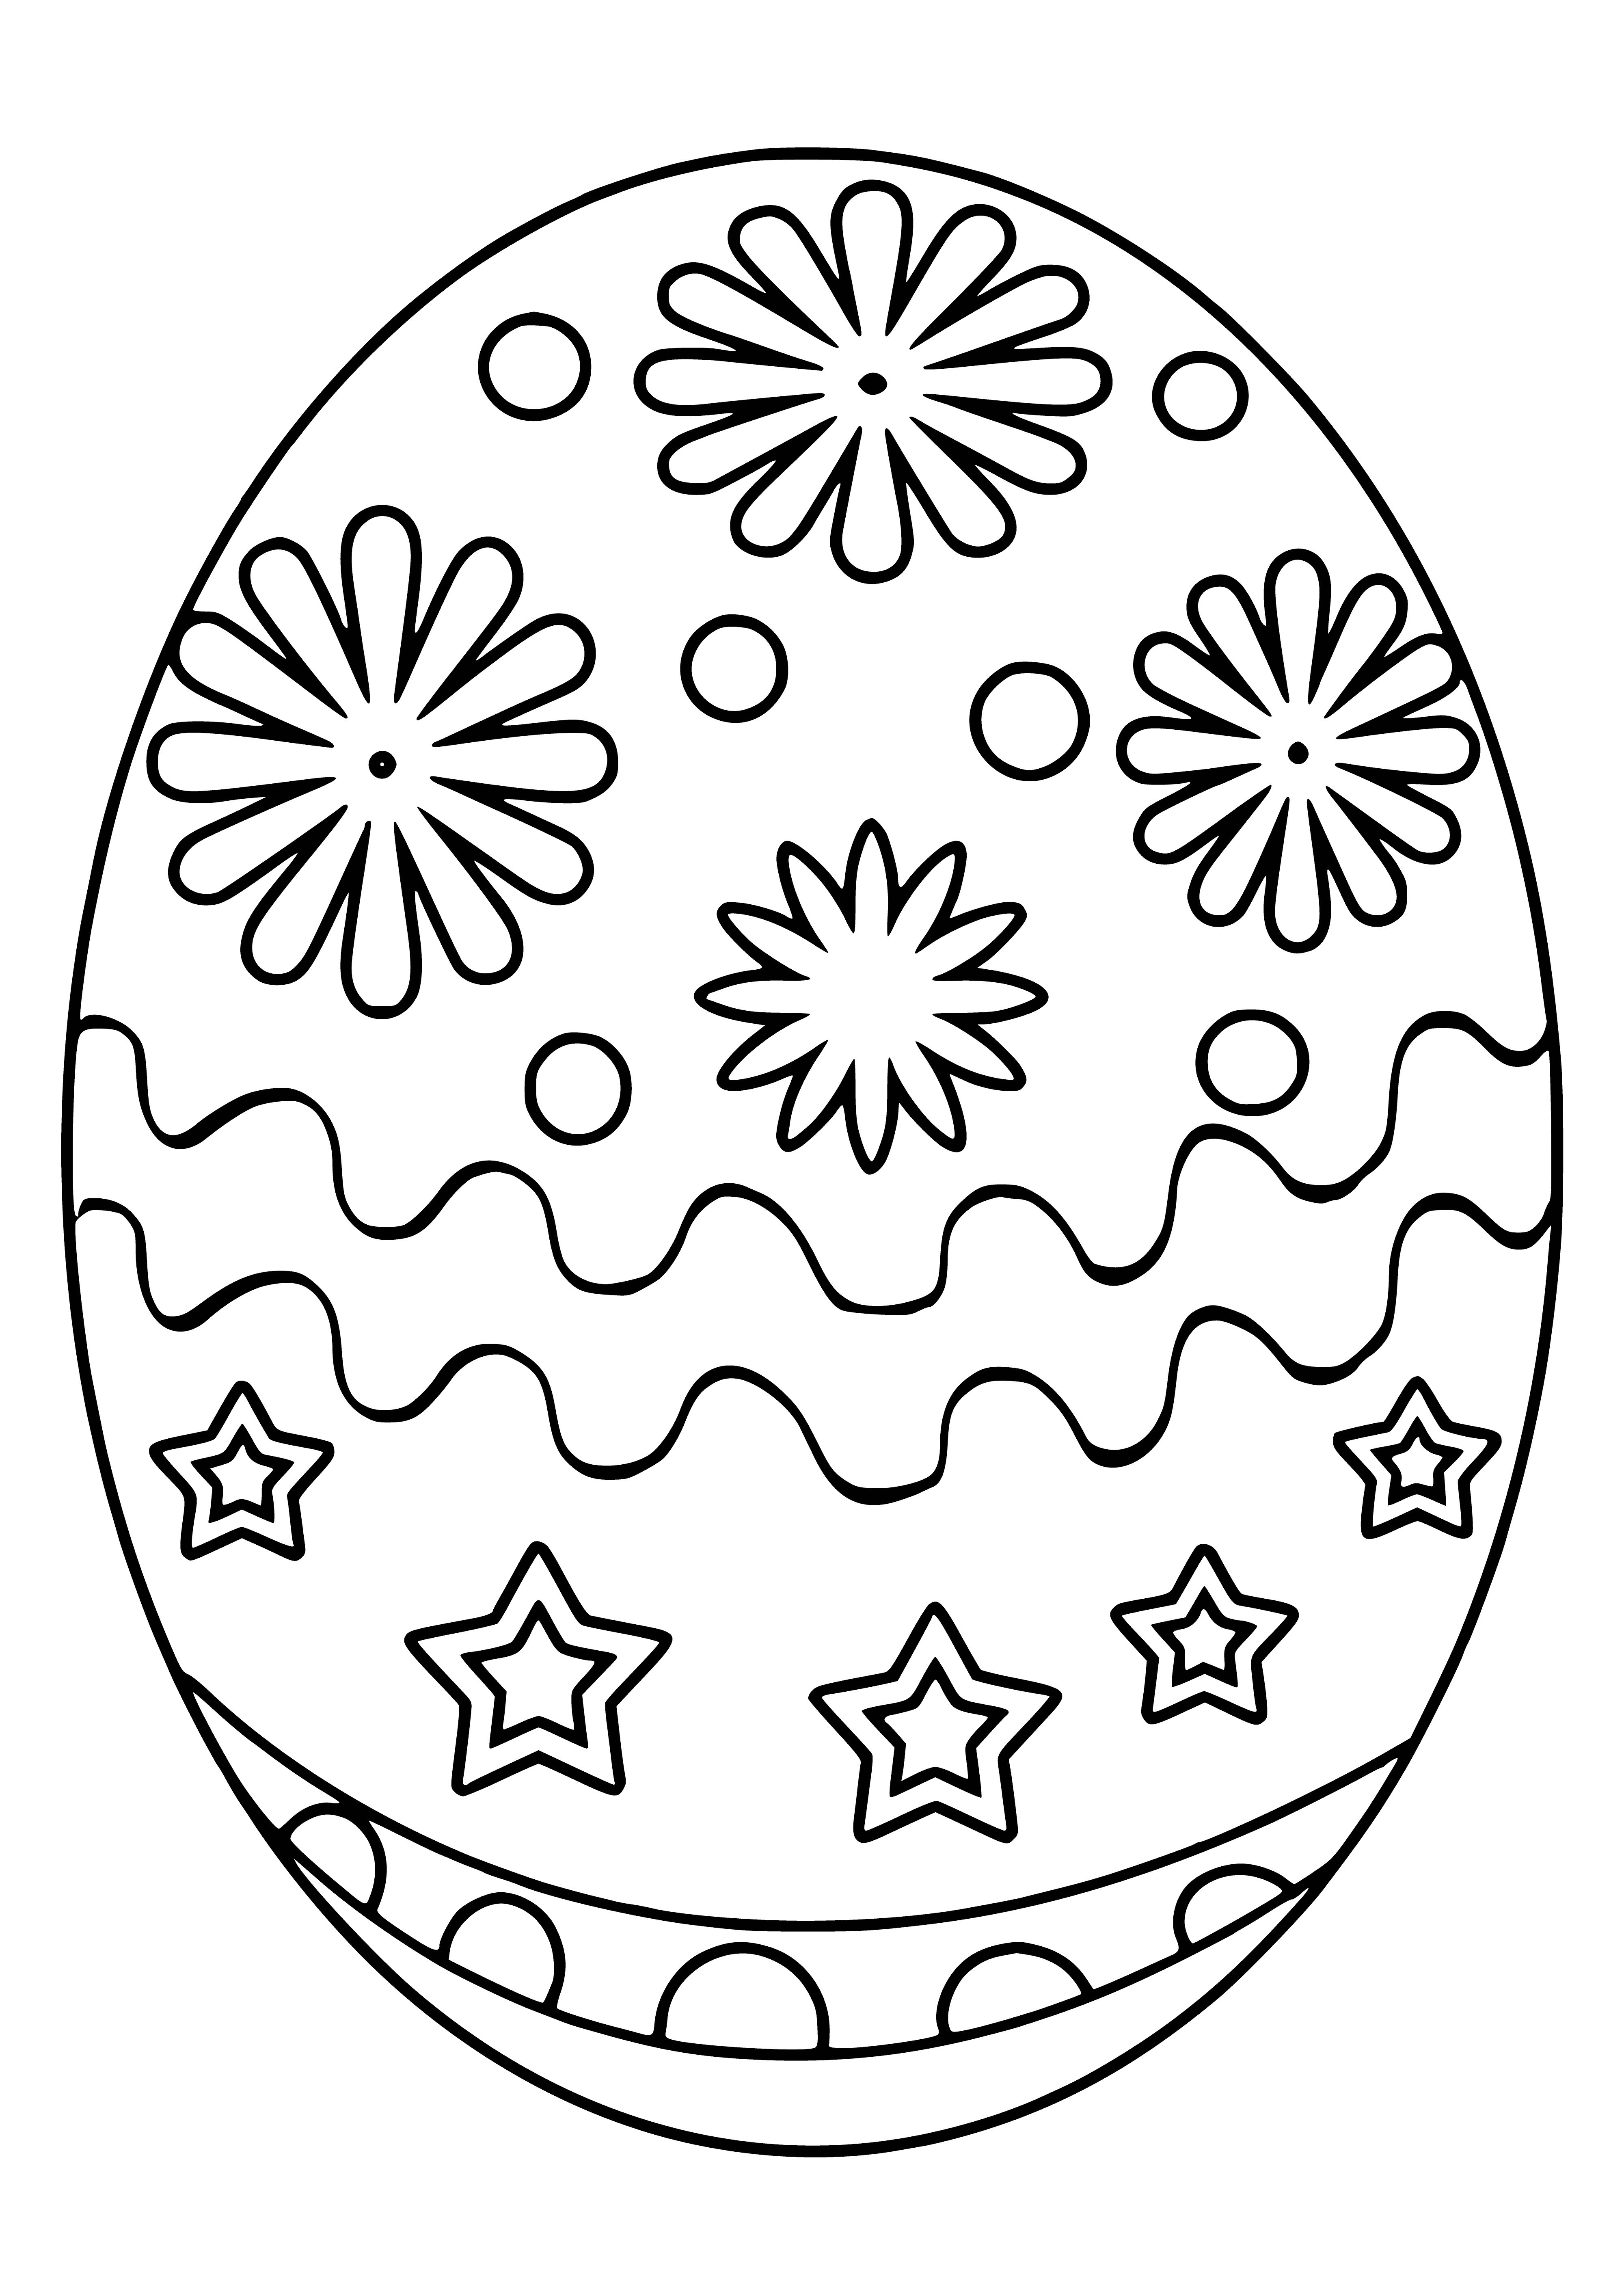 coloring page: Three Easter eggs: two blue, one yellow, each decorated with patterns.